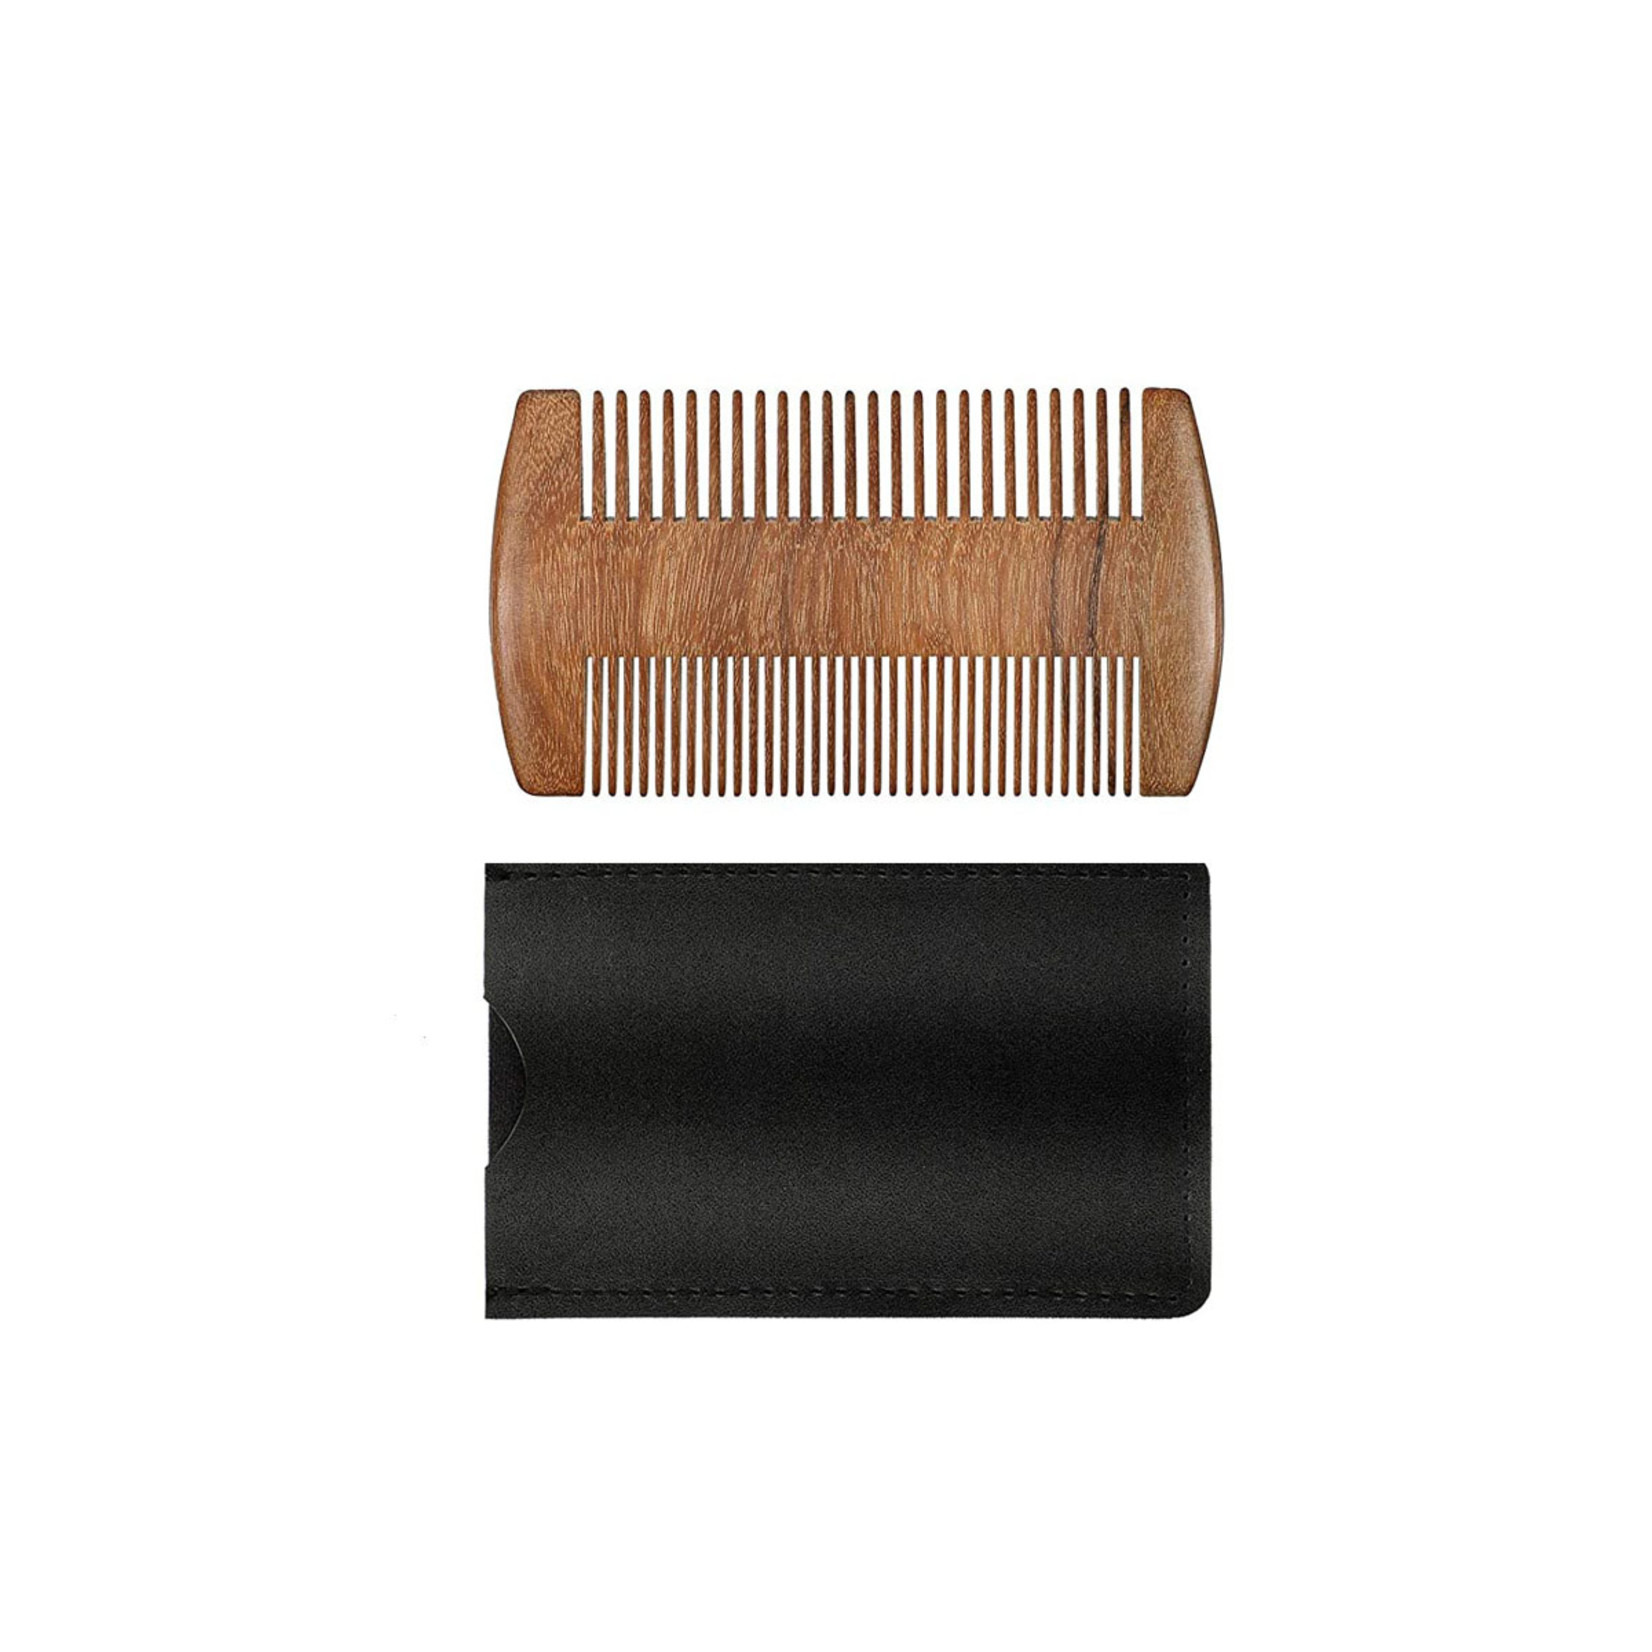 BEARD COMB AND POUCH BROWN